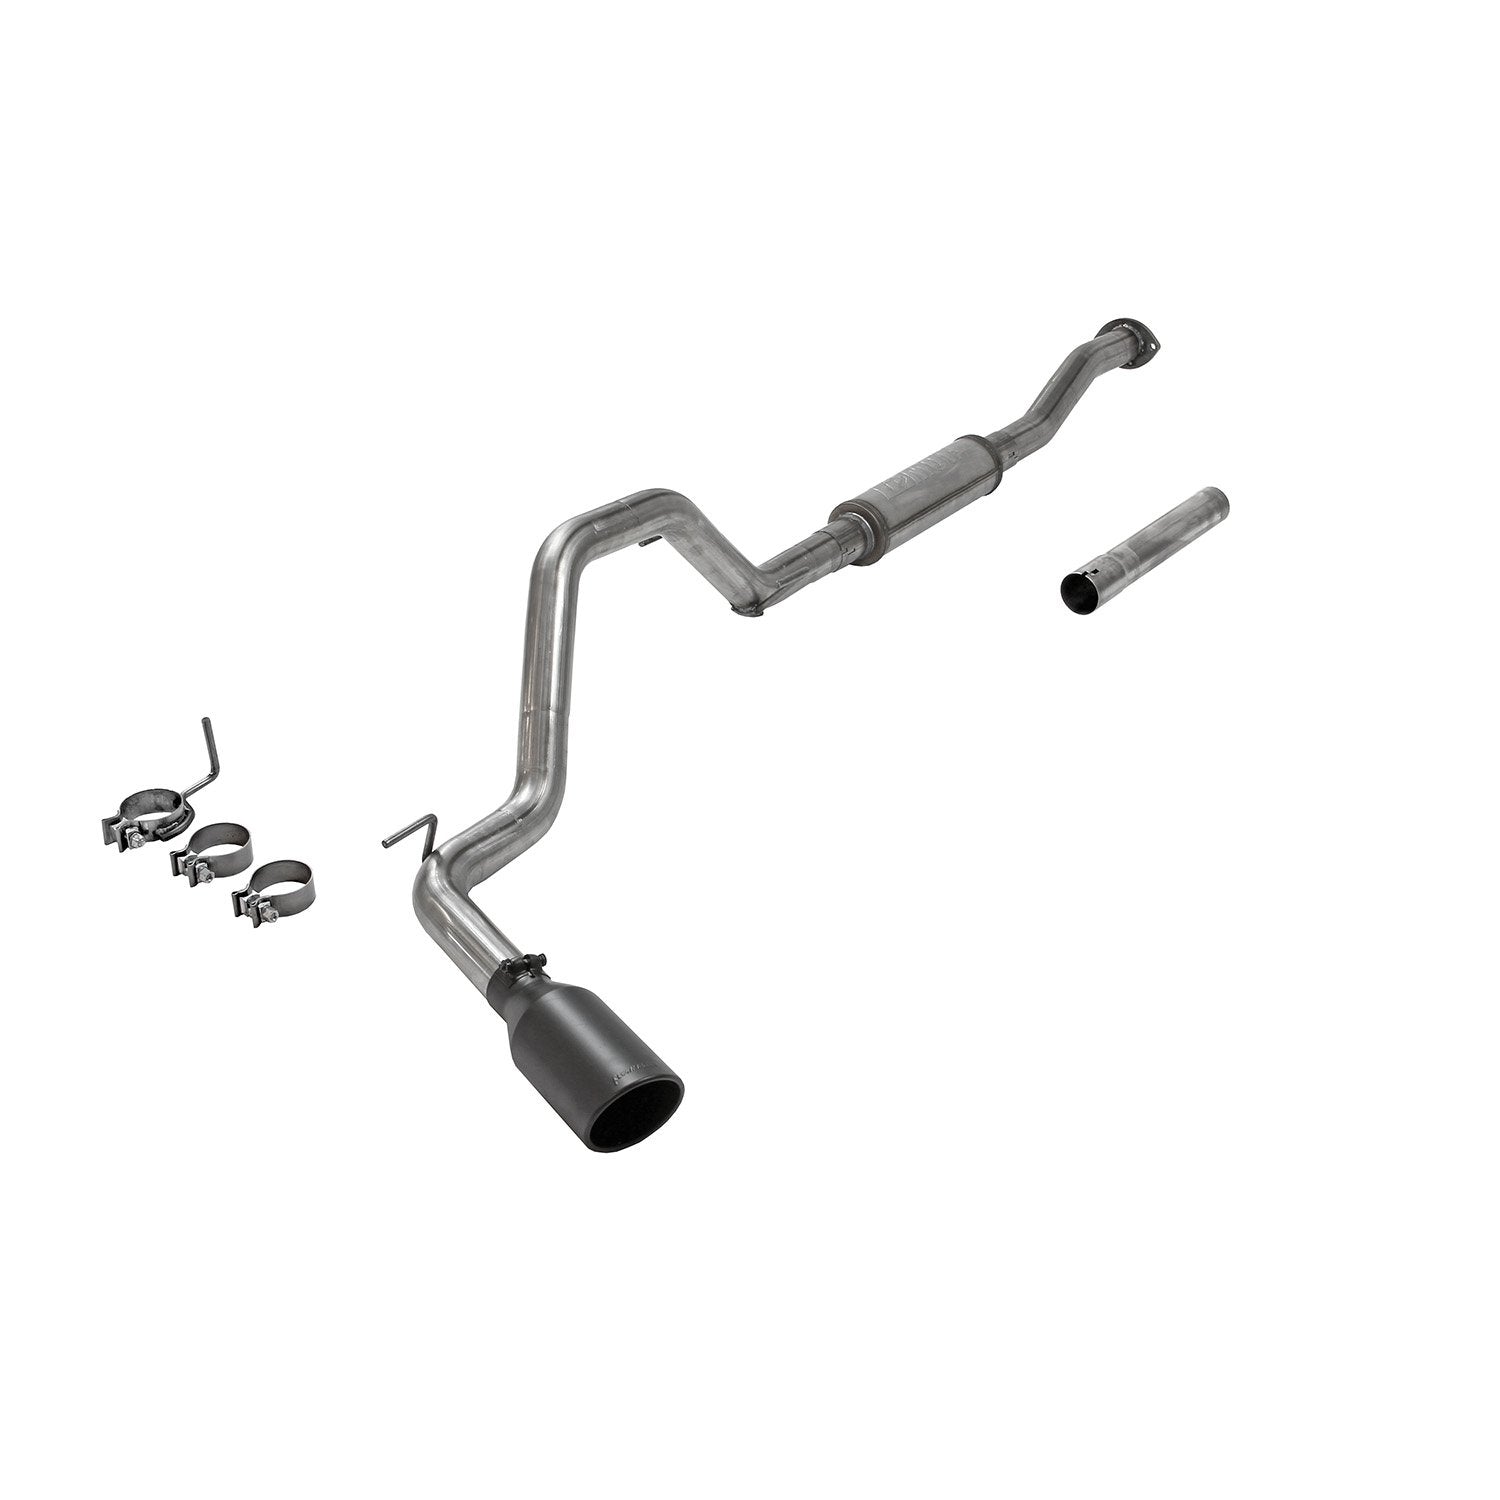 '16-23 Toyota Tacoma Flowmaster FlowFX Cat-Back Exhaust System Performance Flowmaster parts